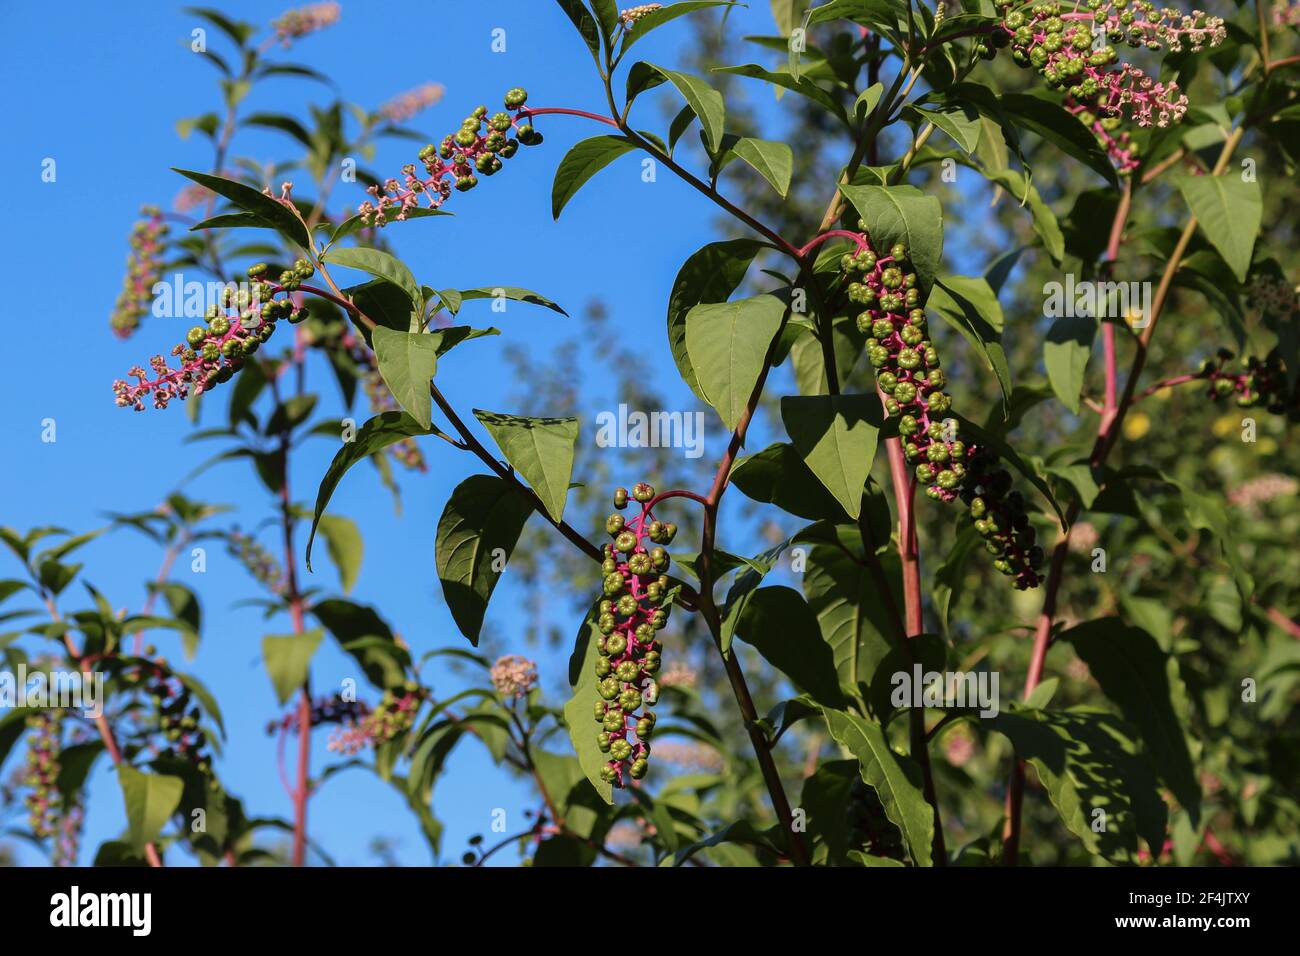 Fruits of American pokeweed (latin name Phytolacca americana), an invasive species in Serbia Stock Photo